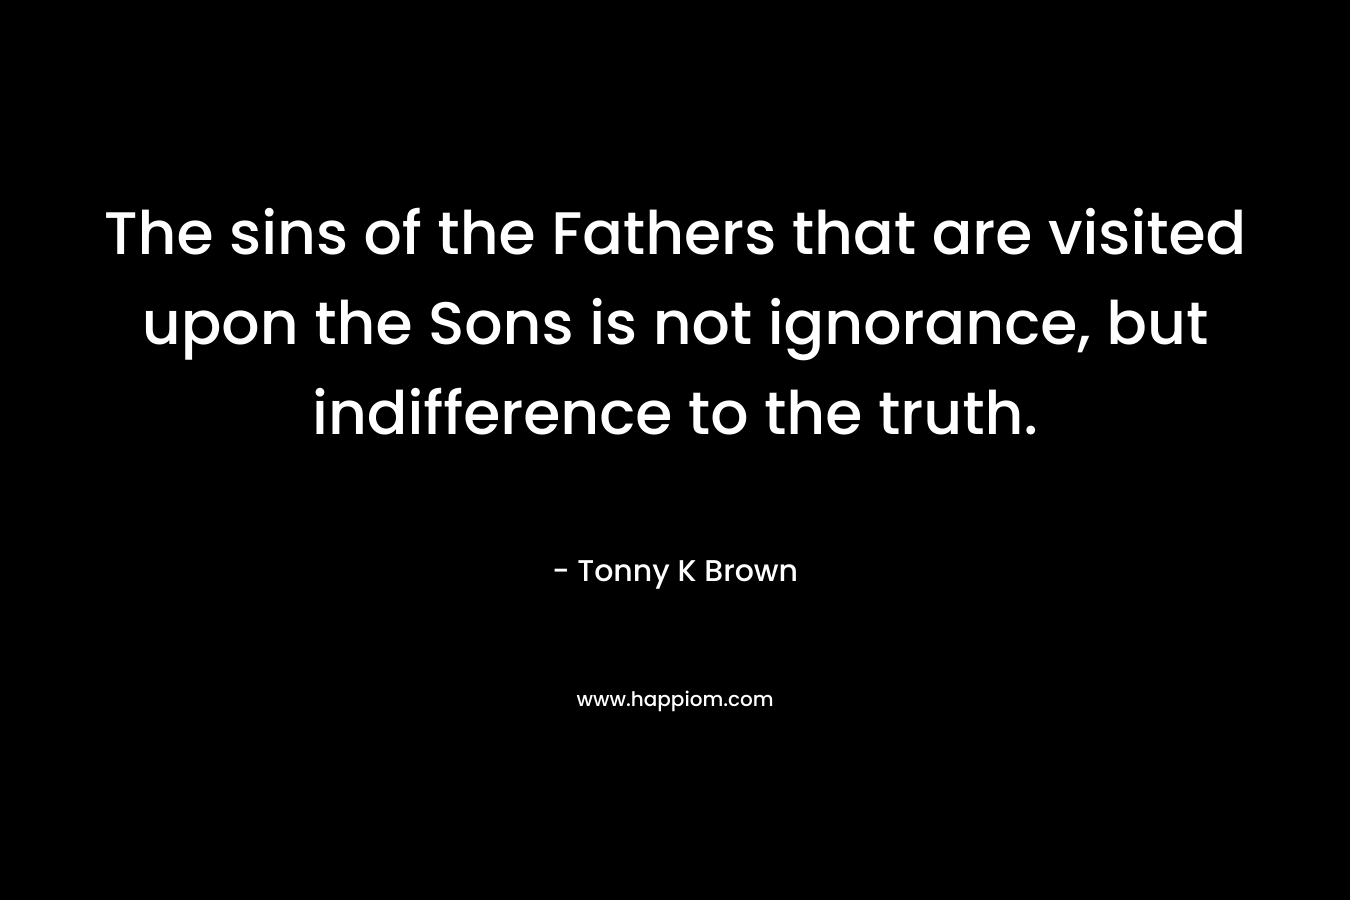 The sins of the Fathers that are visited upon the Sons is not ignorance, but indifference to the truth. – Tonny K Brown